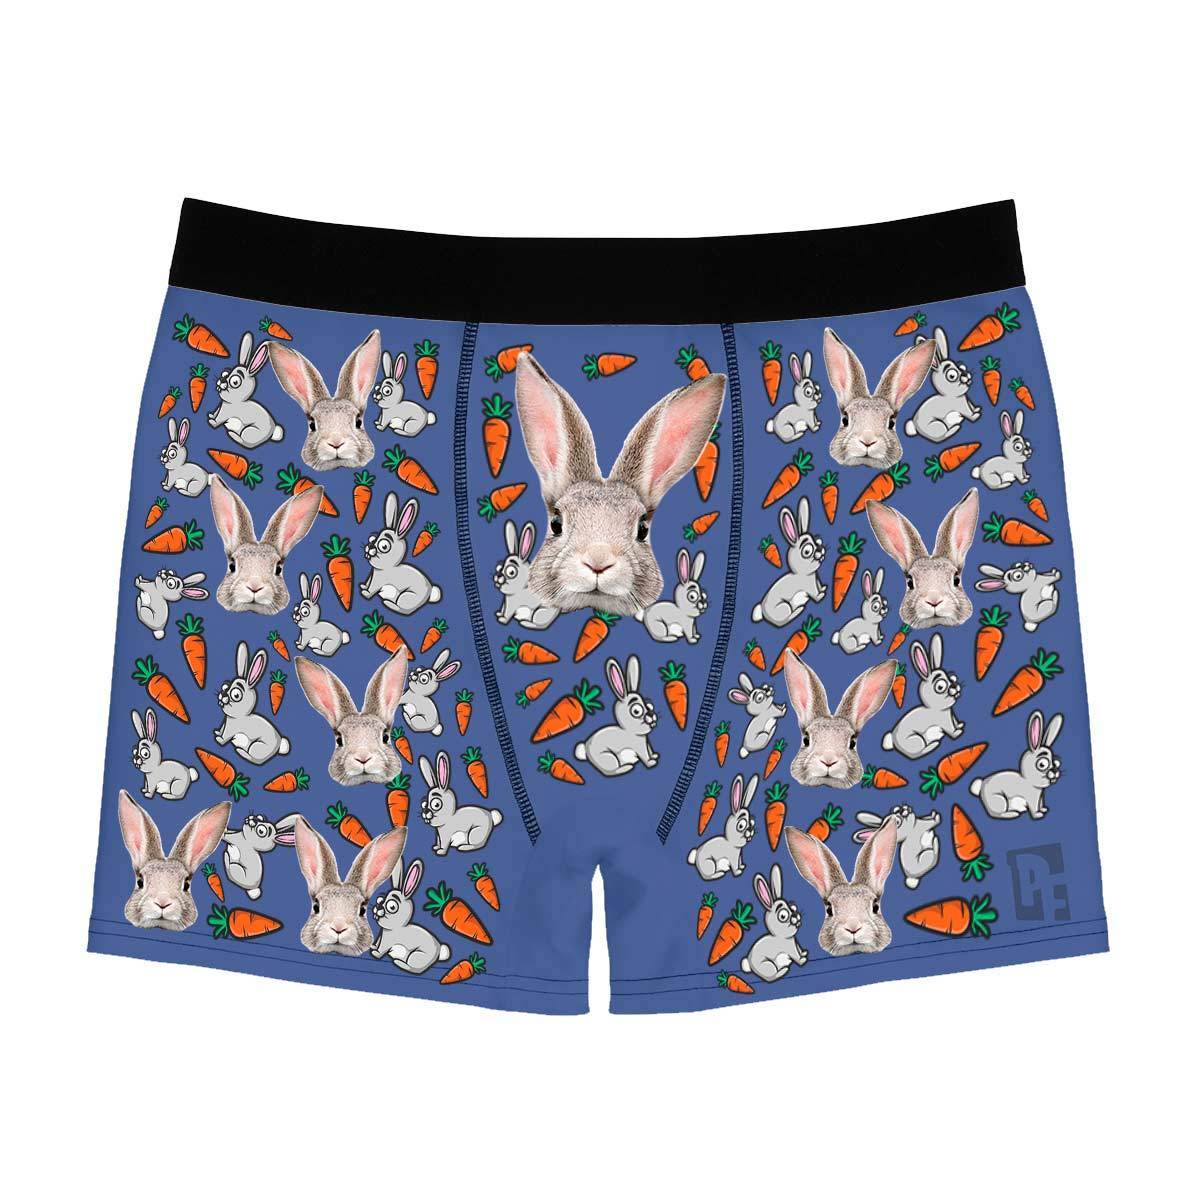 Darkblue Bunny men's boxer briefs personalized with photo printed on them